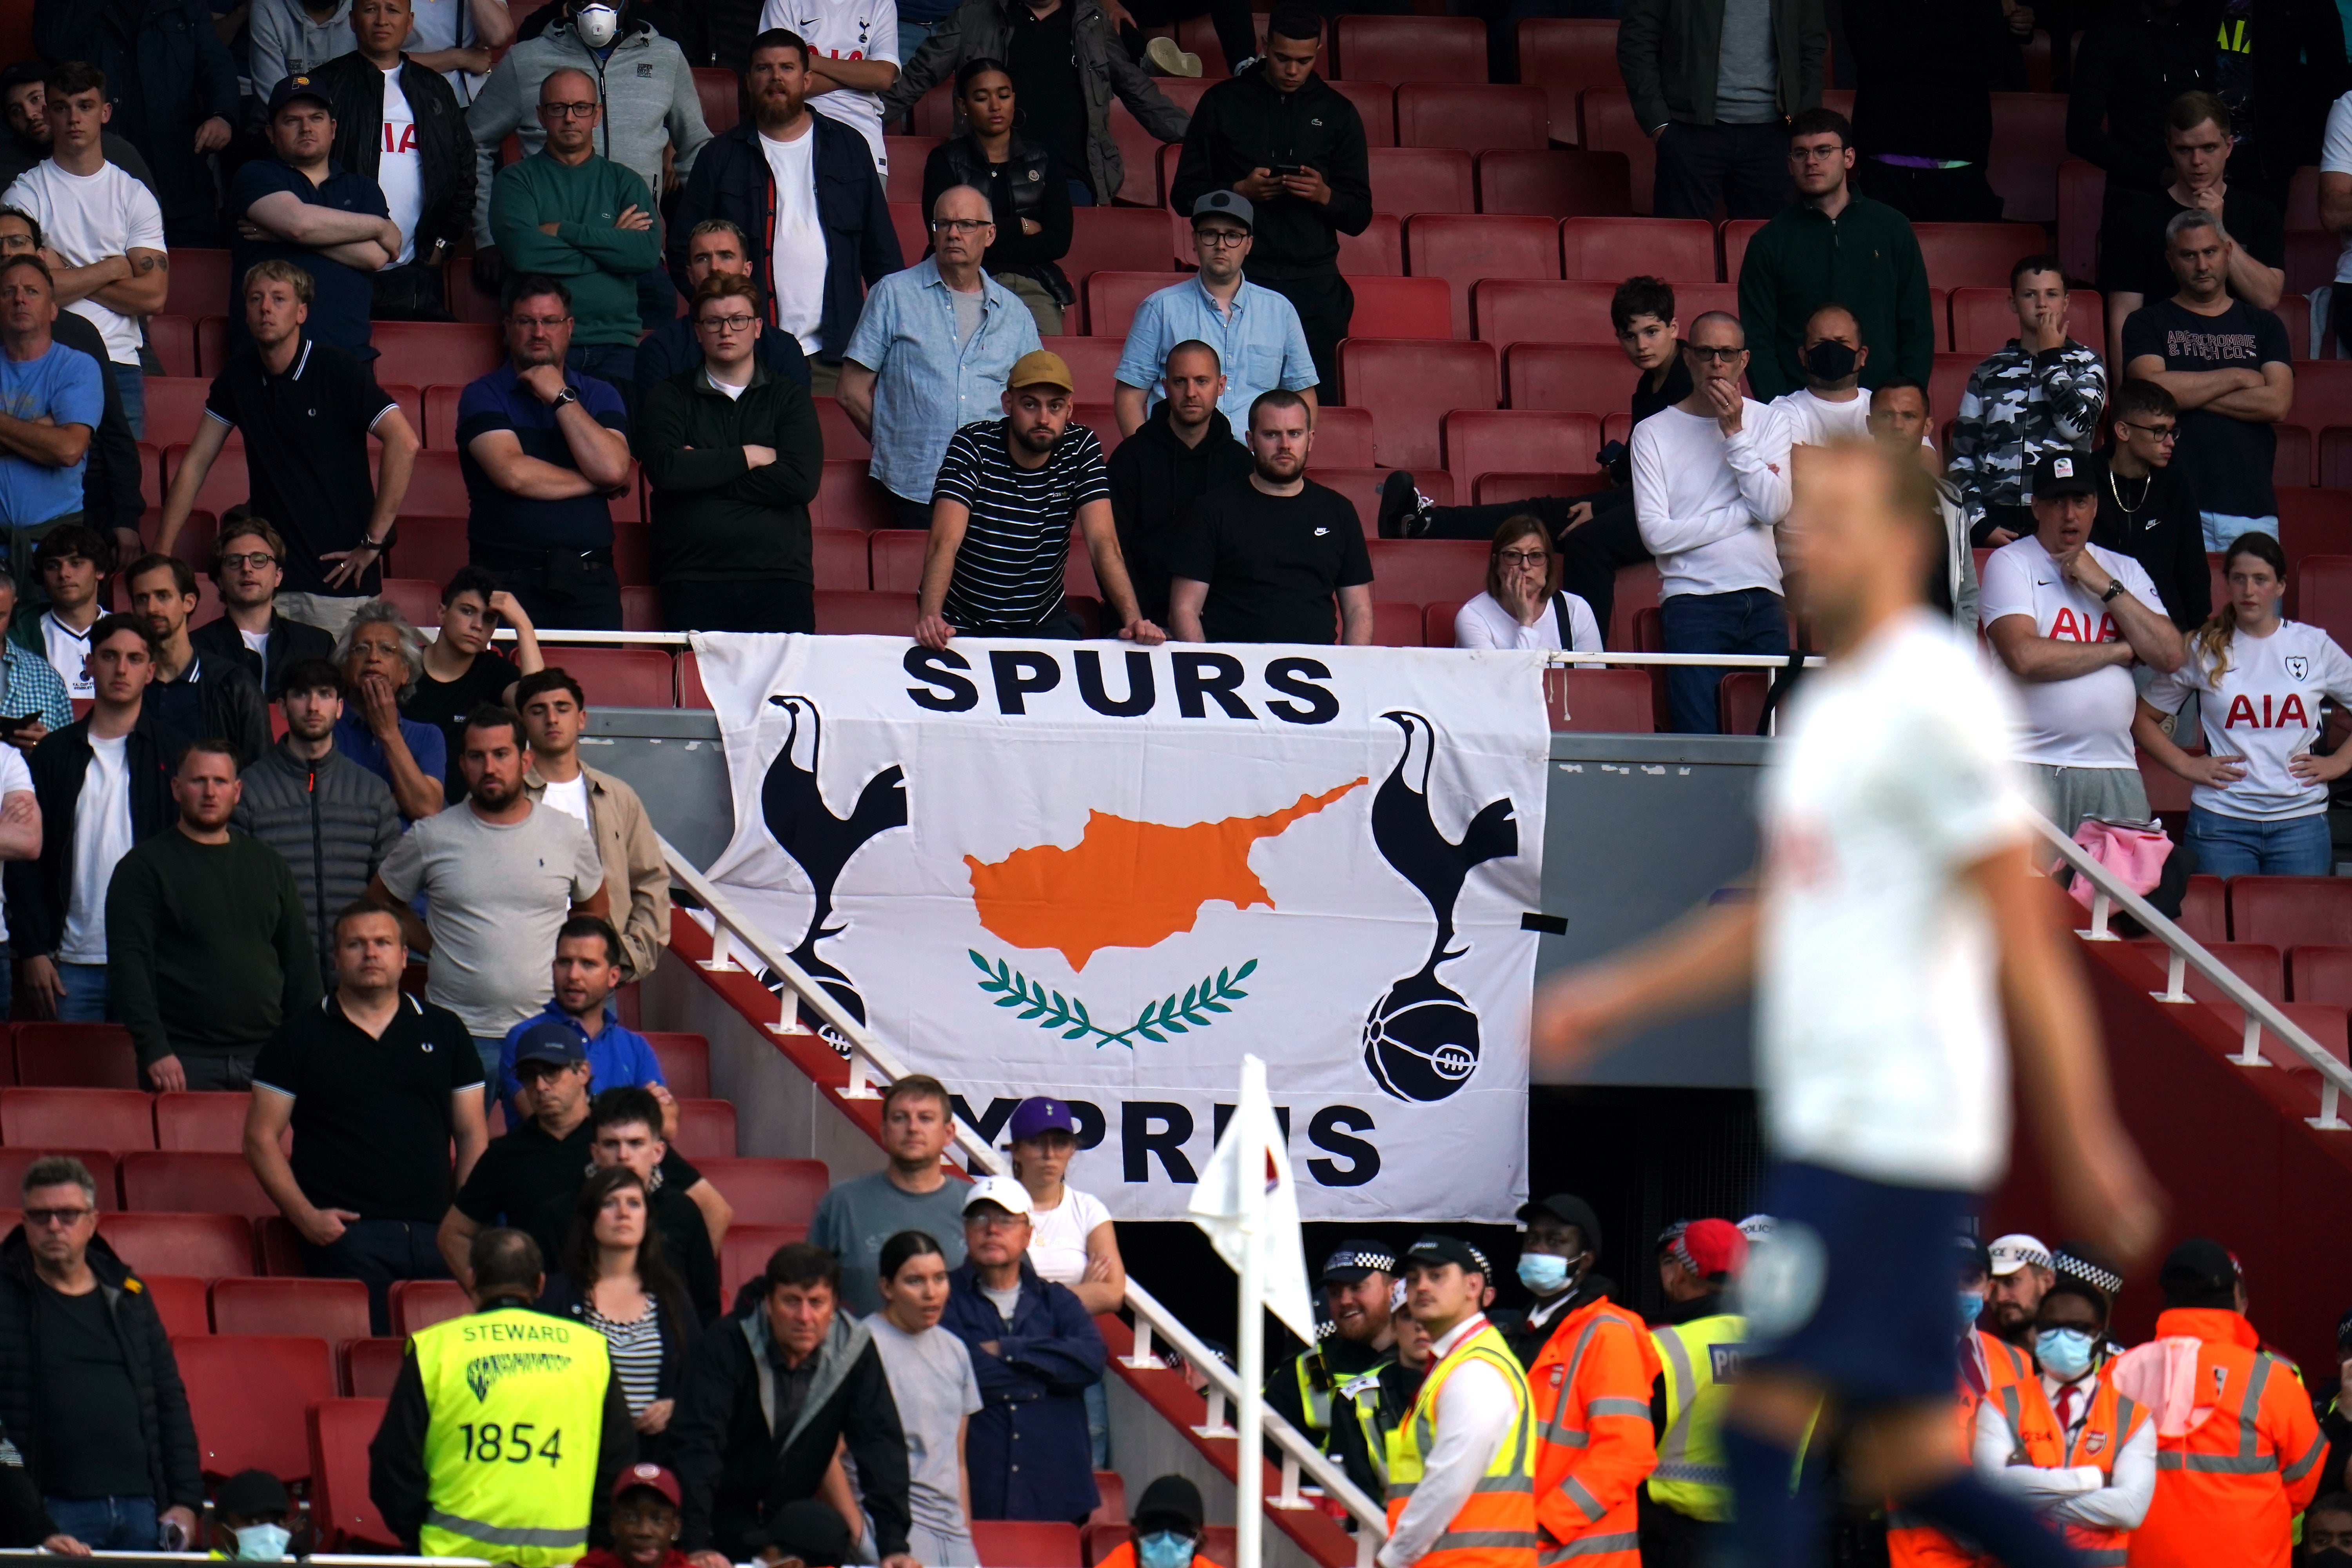 Tottenham fans called for a meeting with the club to discuss concerns (Nick Potts/PA)